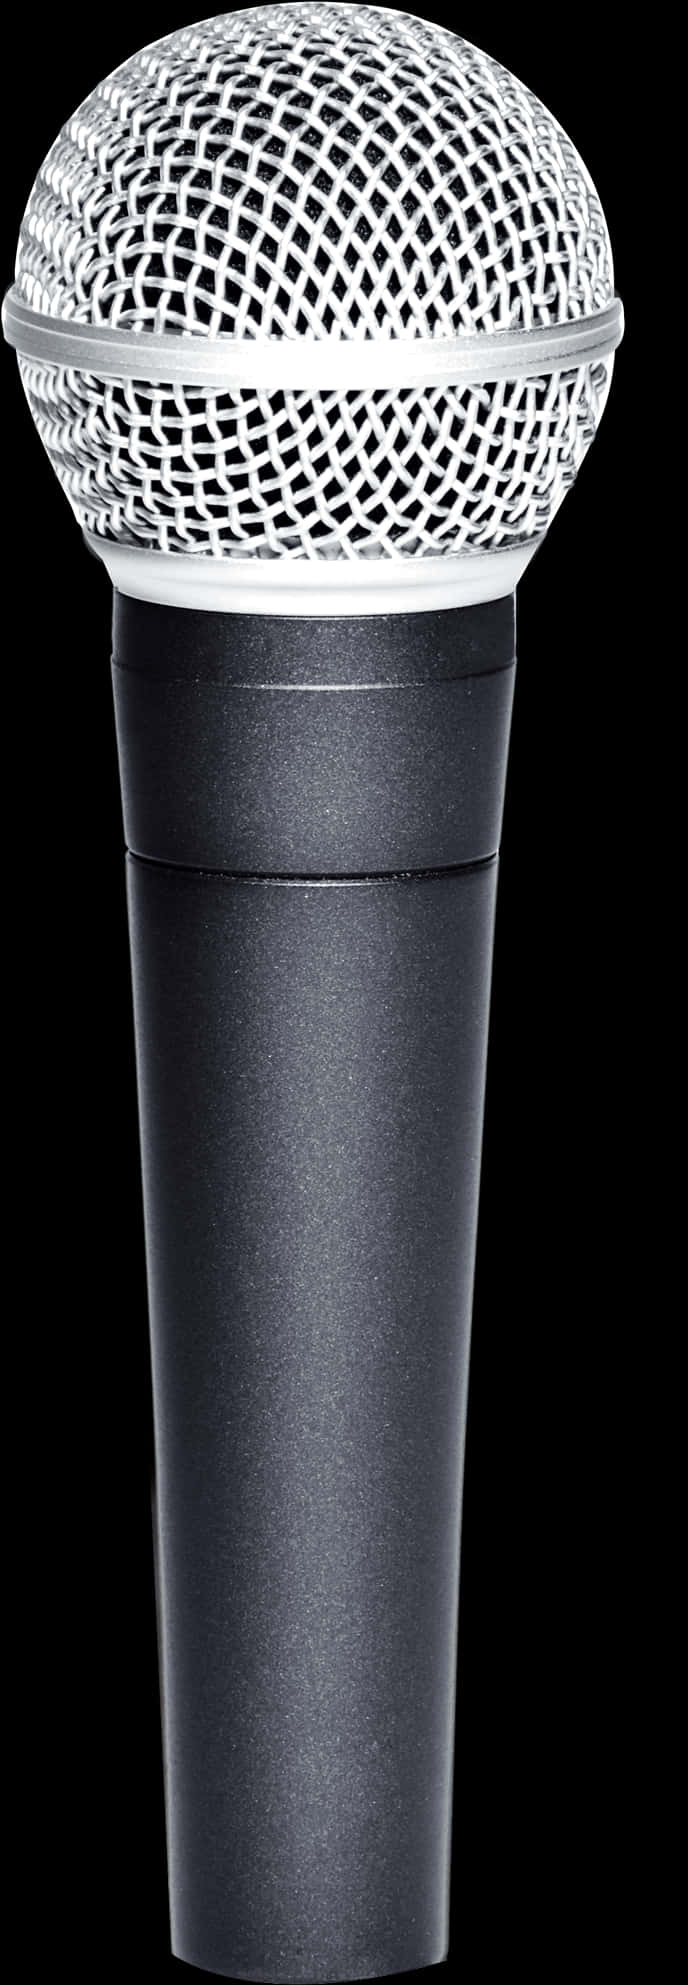 Professional Handheld Microphone Isolated